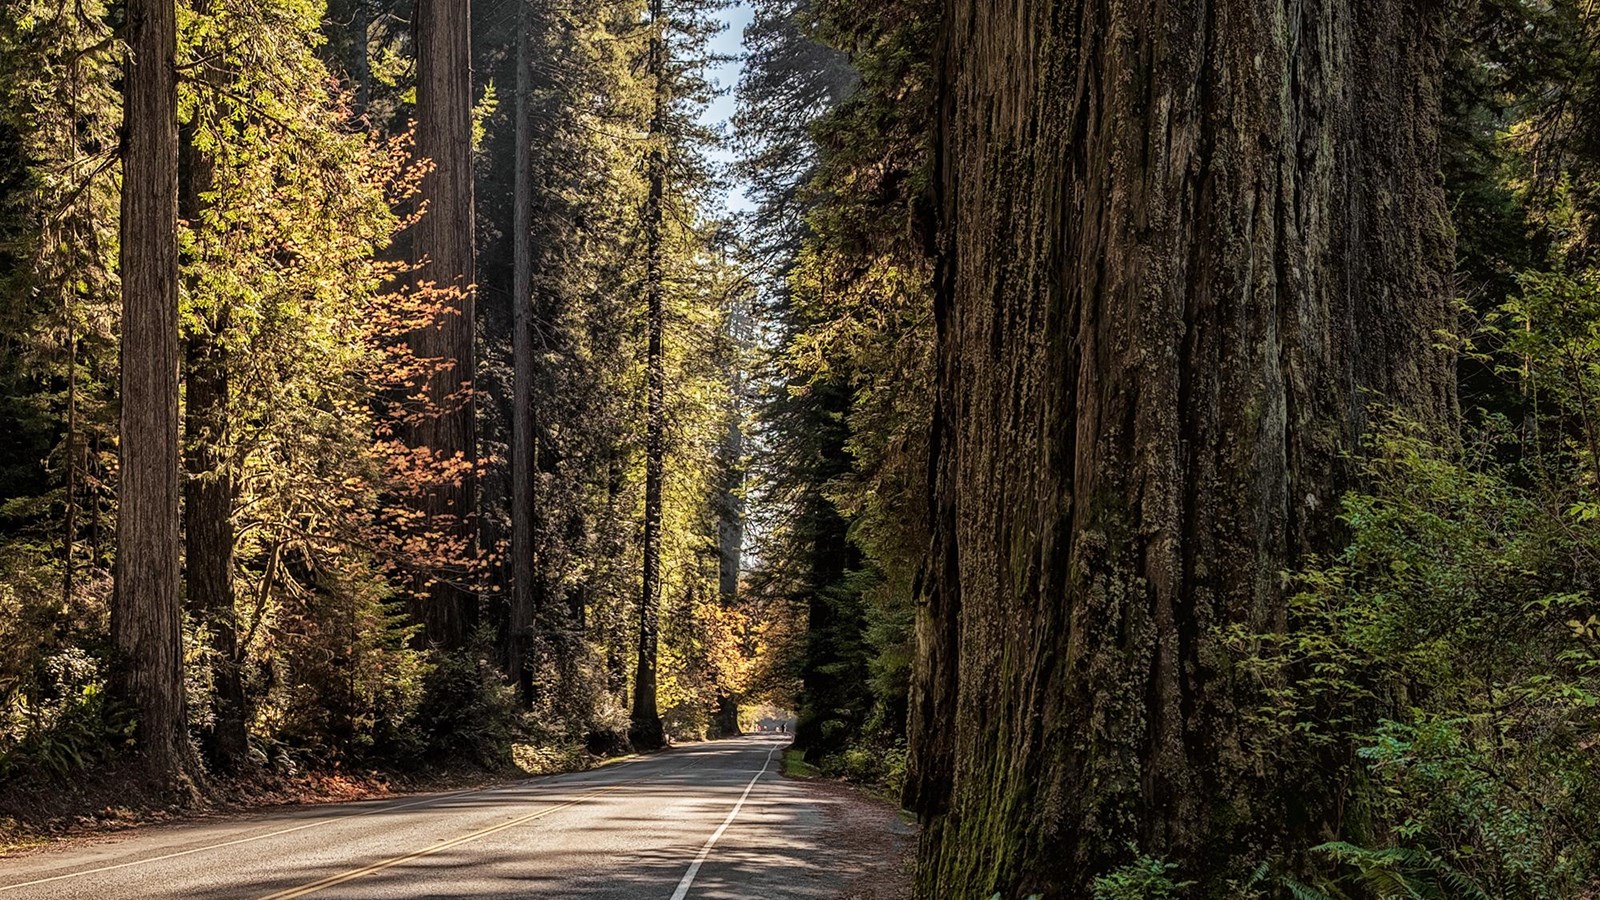 Large redwood trees along a curving, paved road.